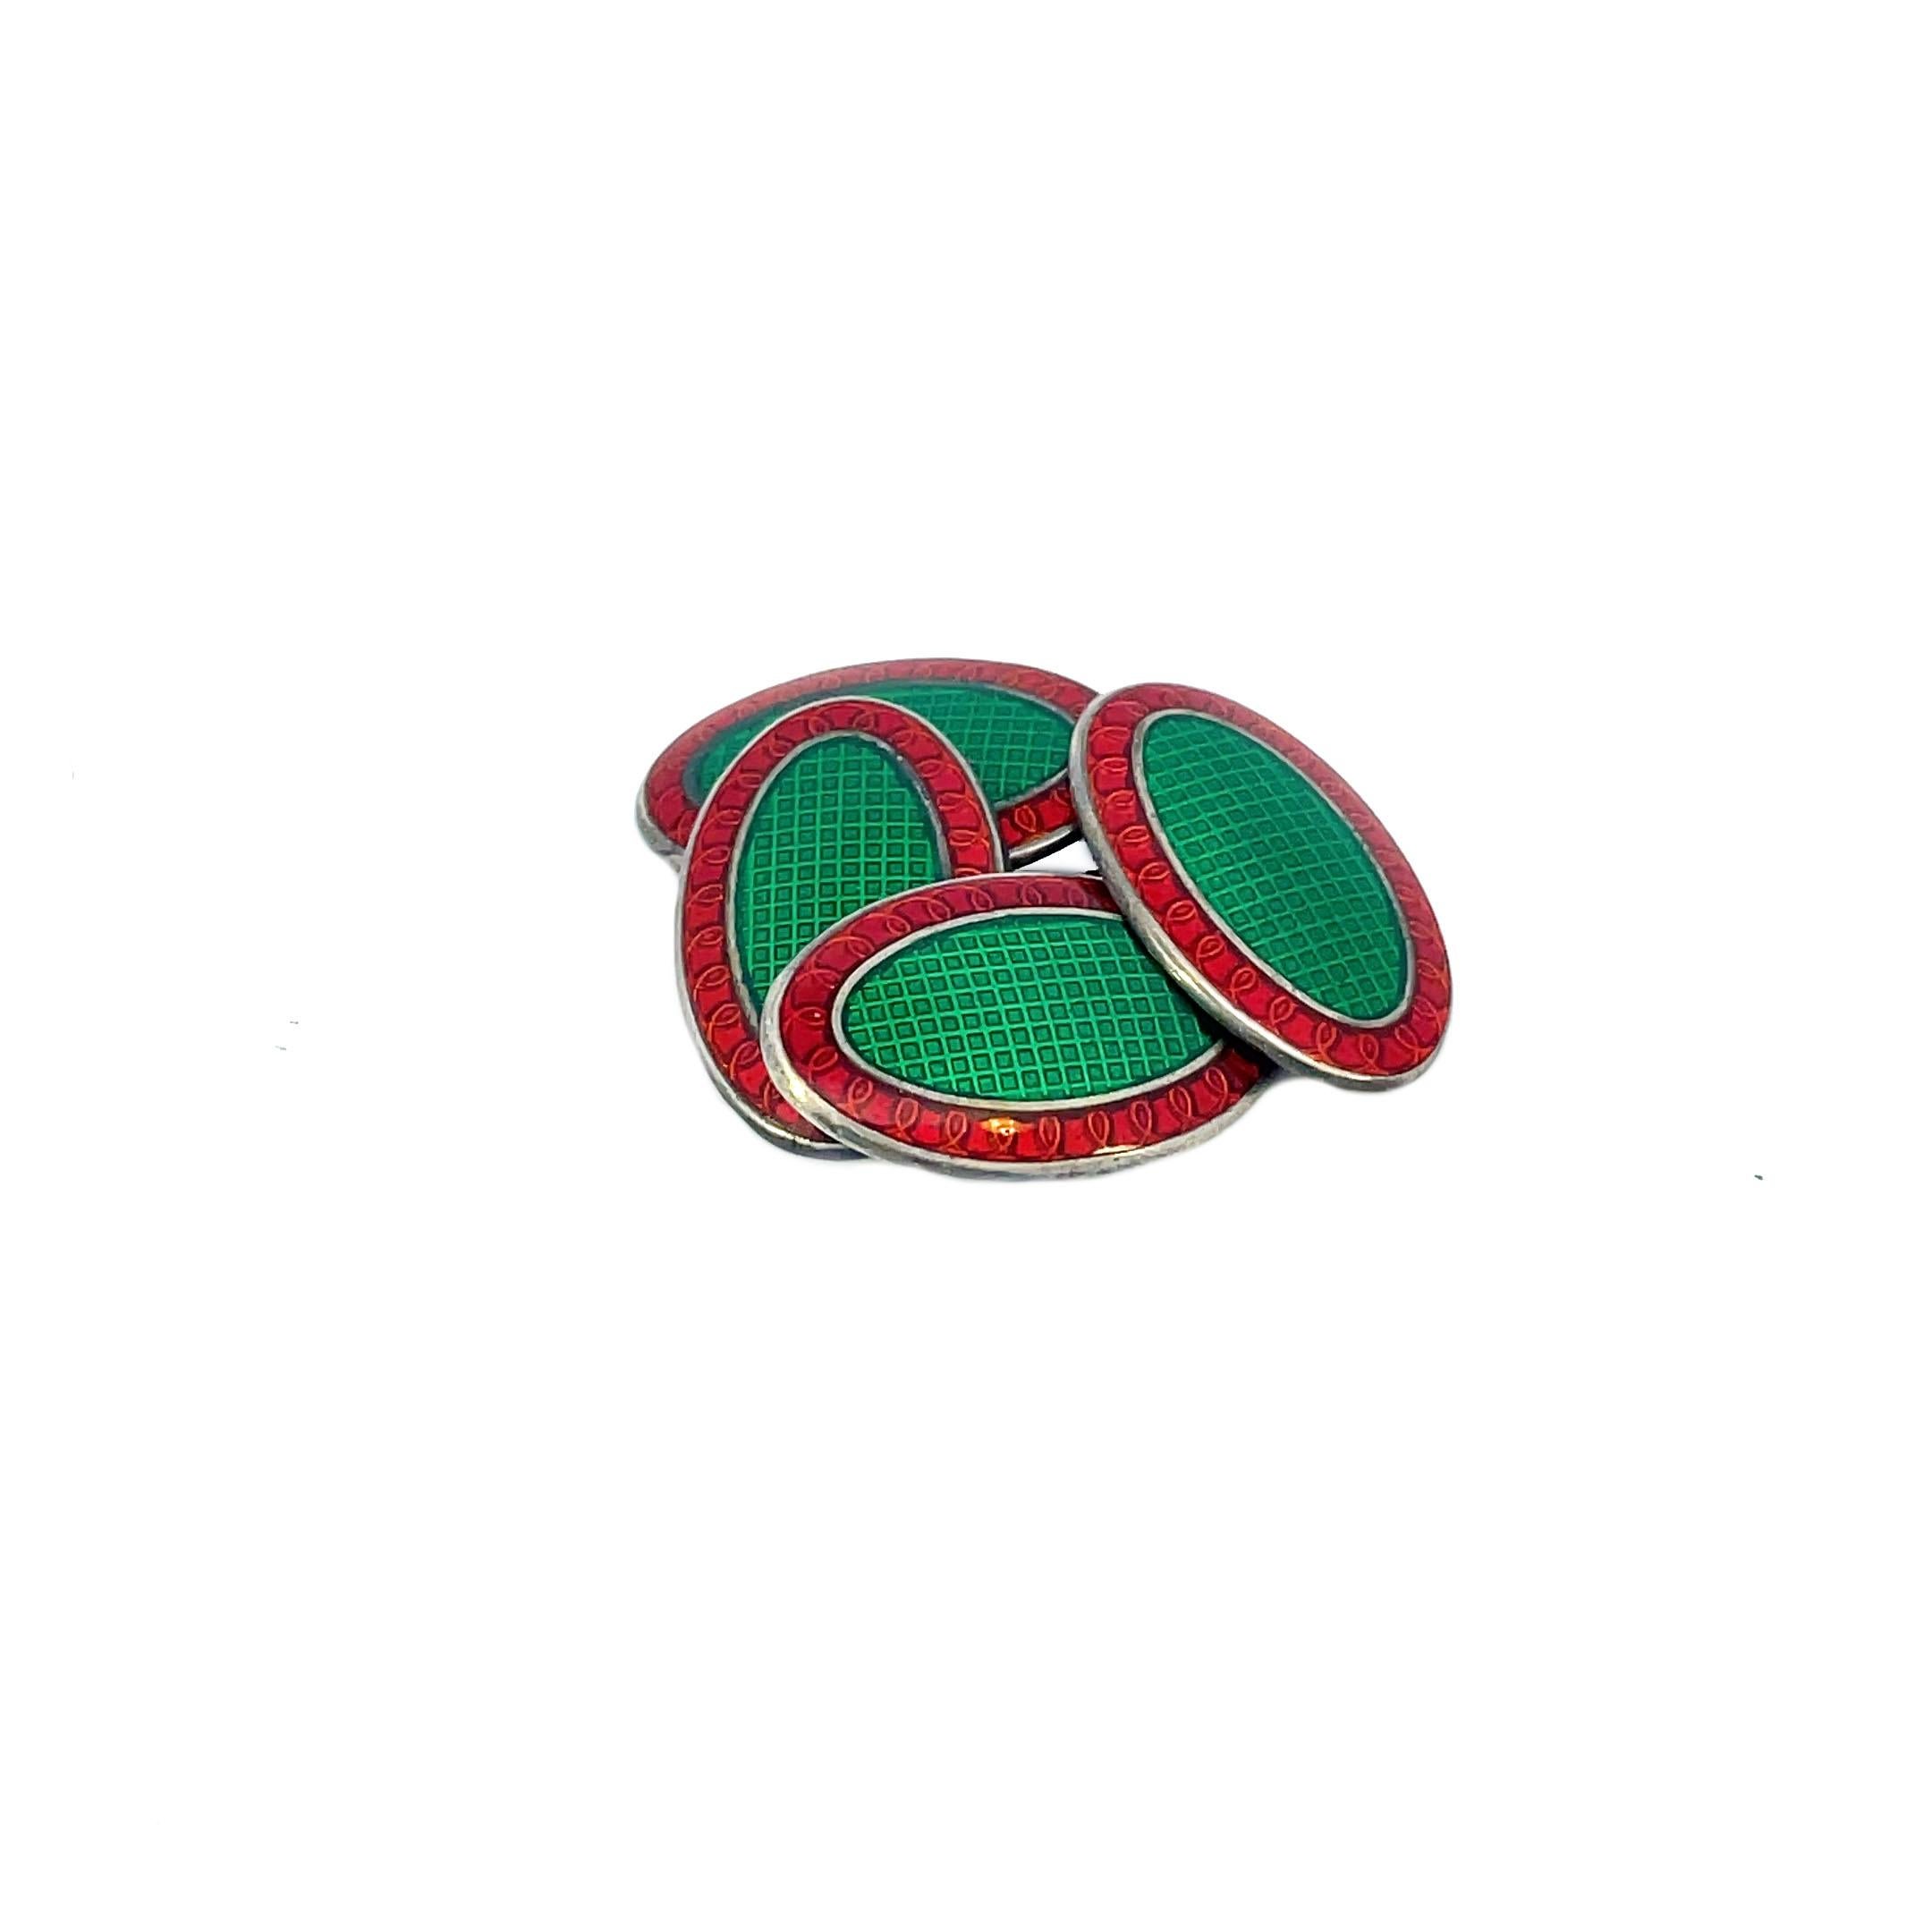 This is a handsome pair of 1925 Art Deco cufflinks crafted in sterling silver with a stunning vibrant red and green guilloche enamel face. Dashing and vibrant, these cufflinks are sure to catch anyone's eye! A vibrant cherry red border adorned with